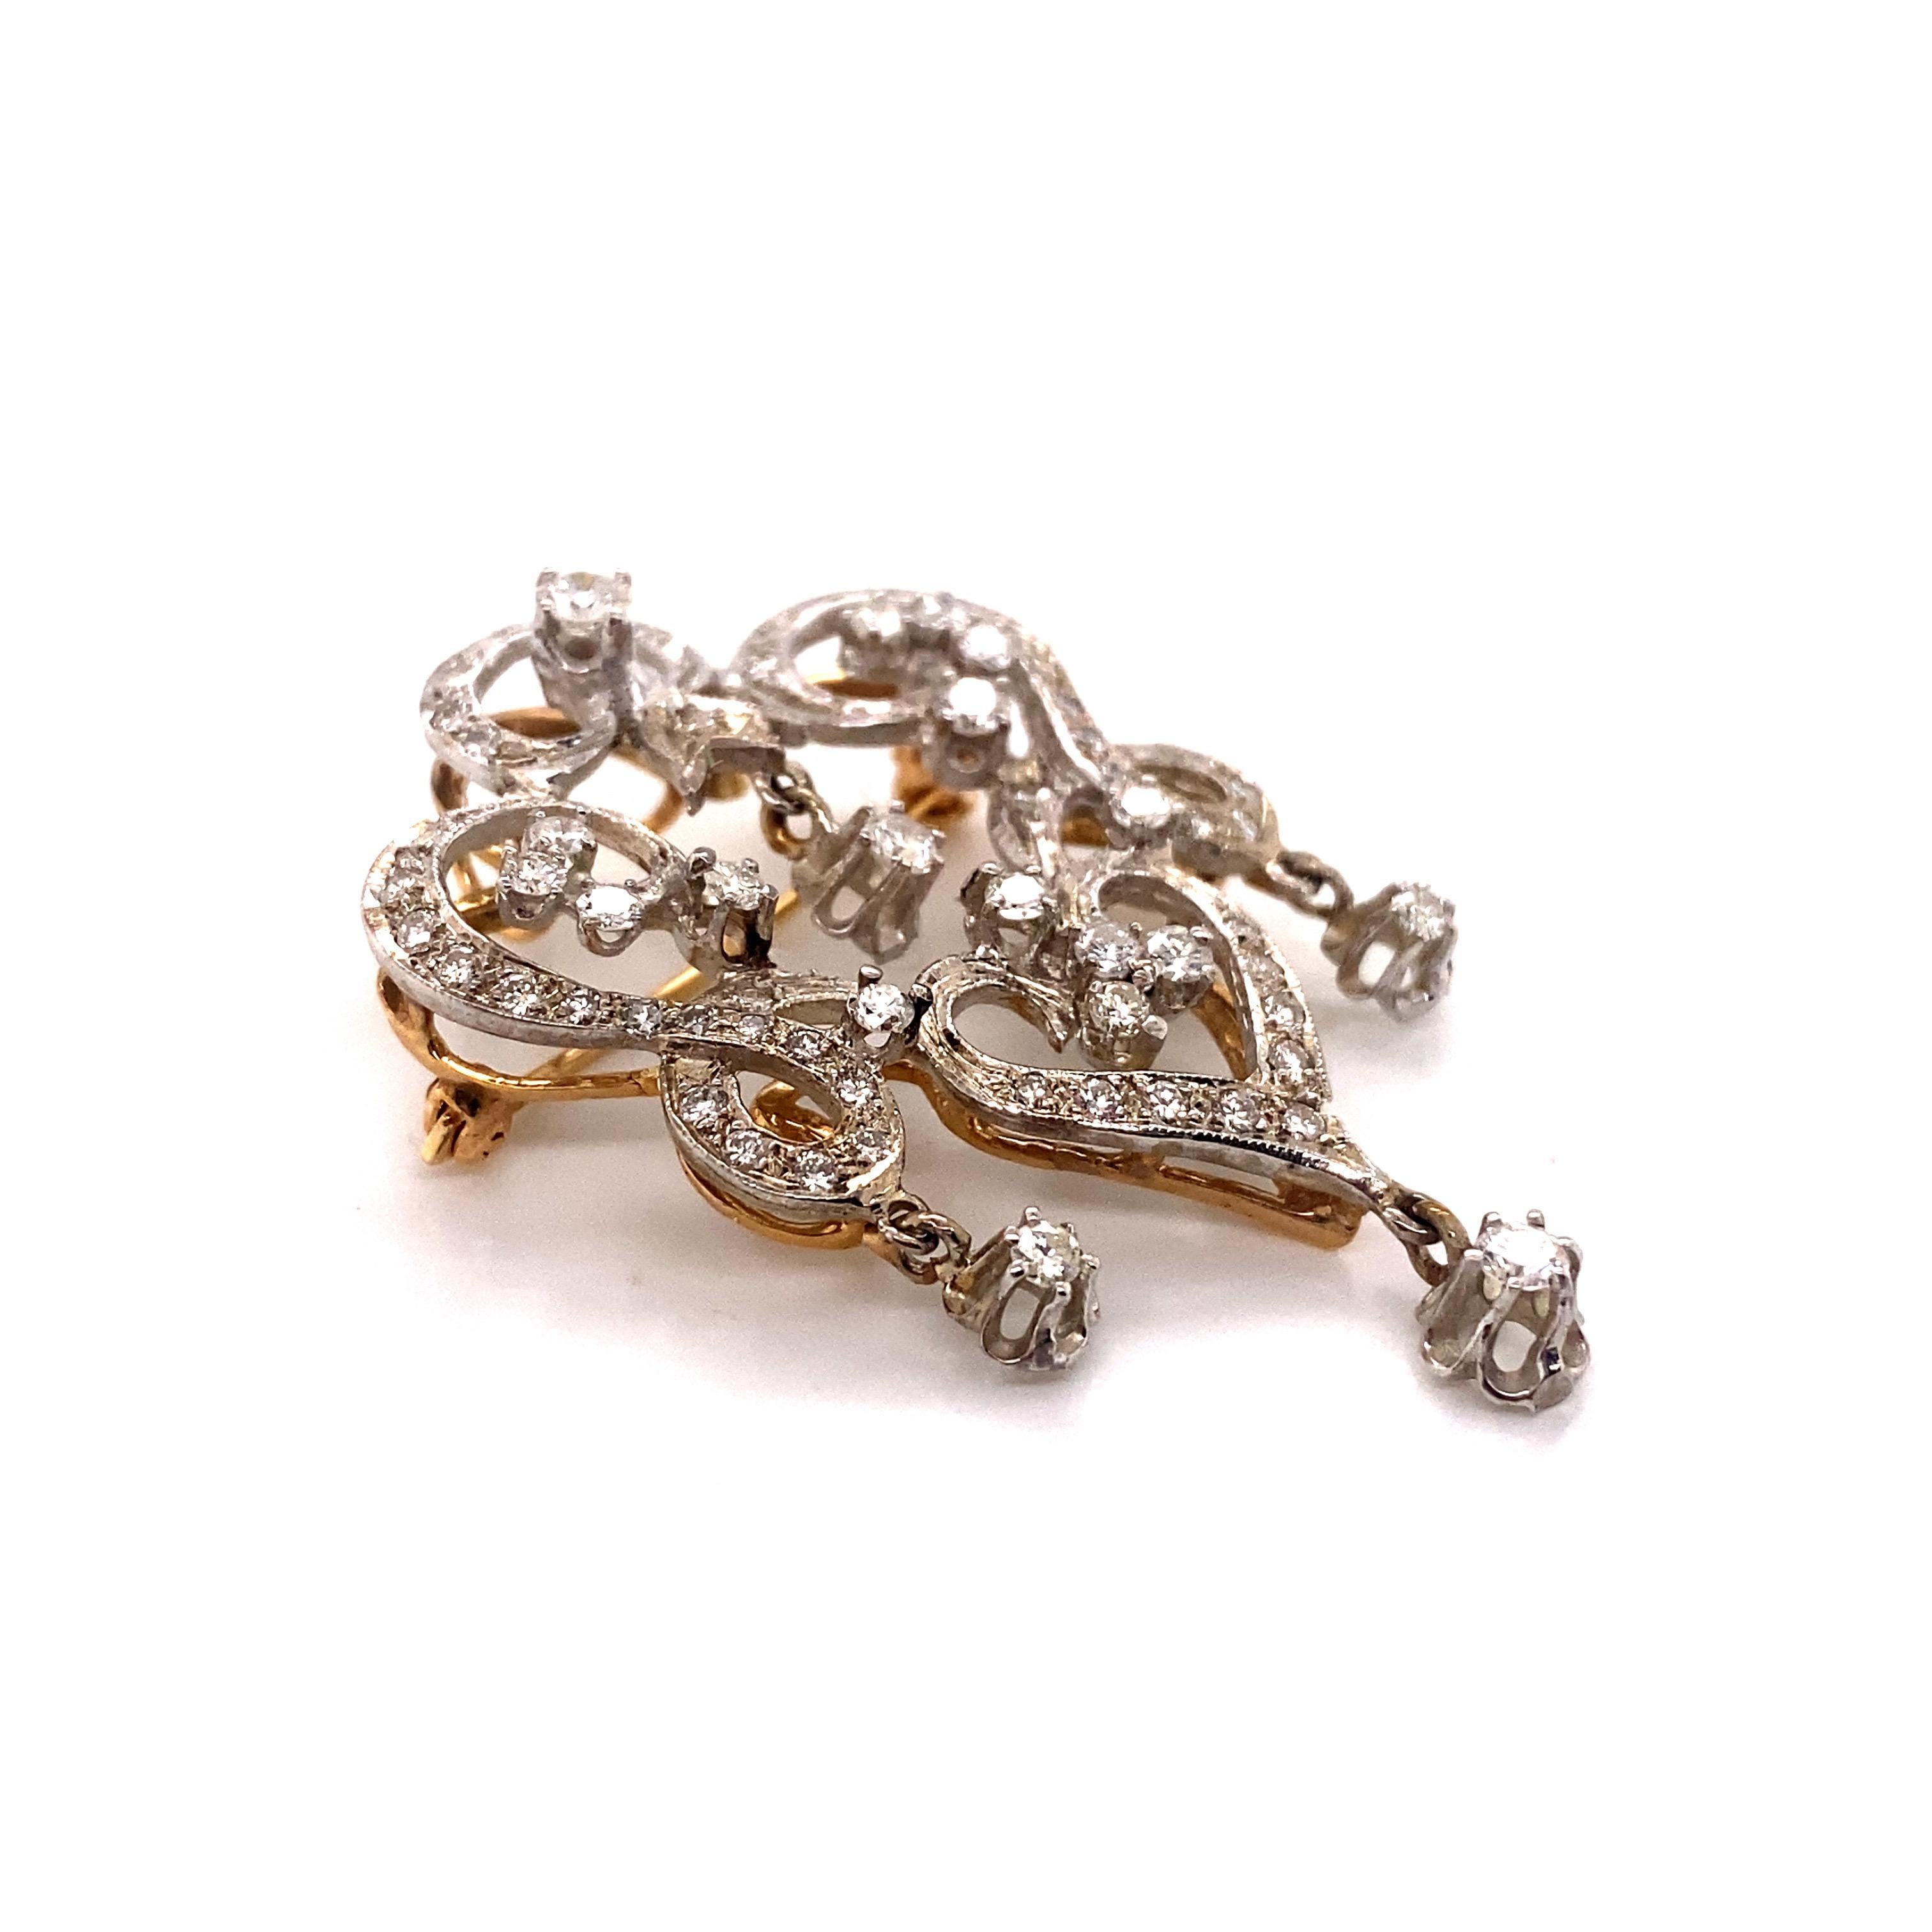 Vintage 1950’s Edwardian Reproduction Diamond Chandelier Brooch and Pendant. The brooch contains 19 larger round diamonds set in 4 prong heads and 6 prong tulip dangling heads and weigh approximately .75ct total weight. There are an additional 53